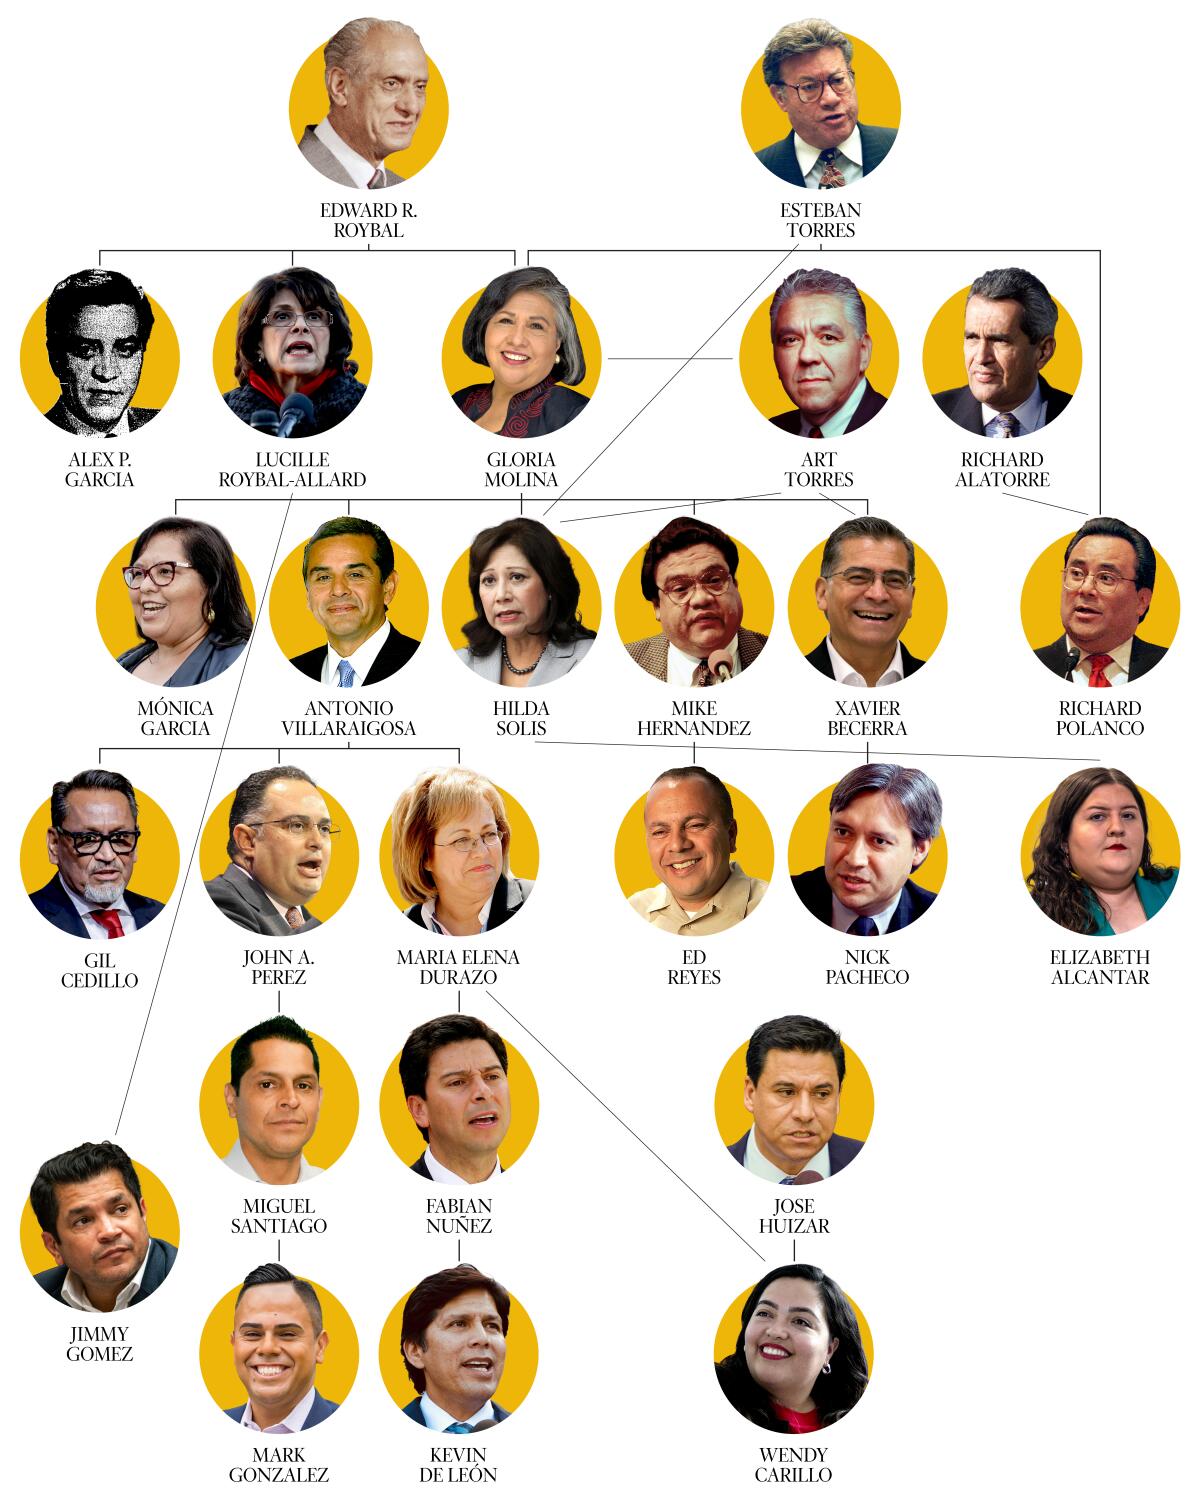 Eastside Latino politicians family tree with Edward R Roybal and Esteban Torres at top.